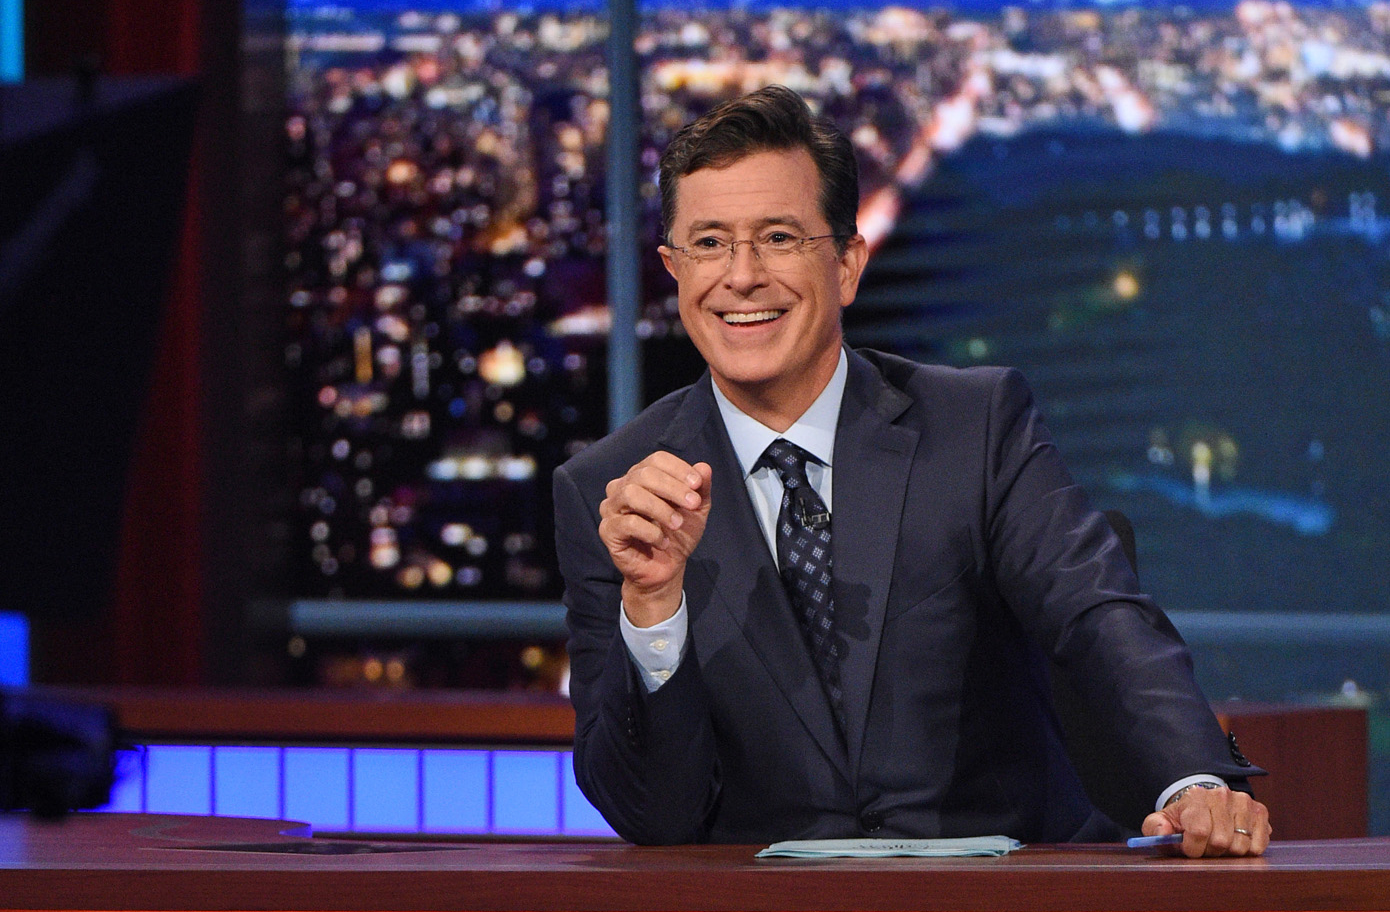 CBS to Air a Special Live Episode of 'The Late Show with Stephen Colbe...